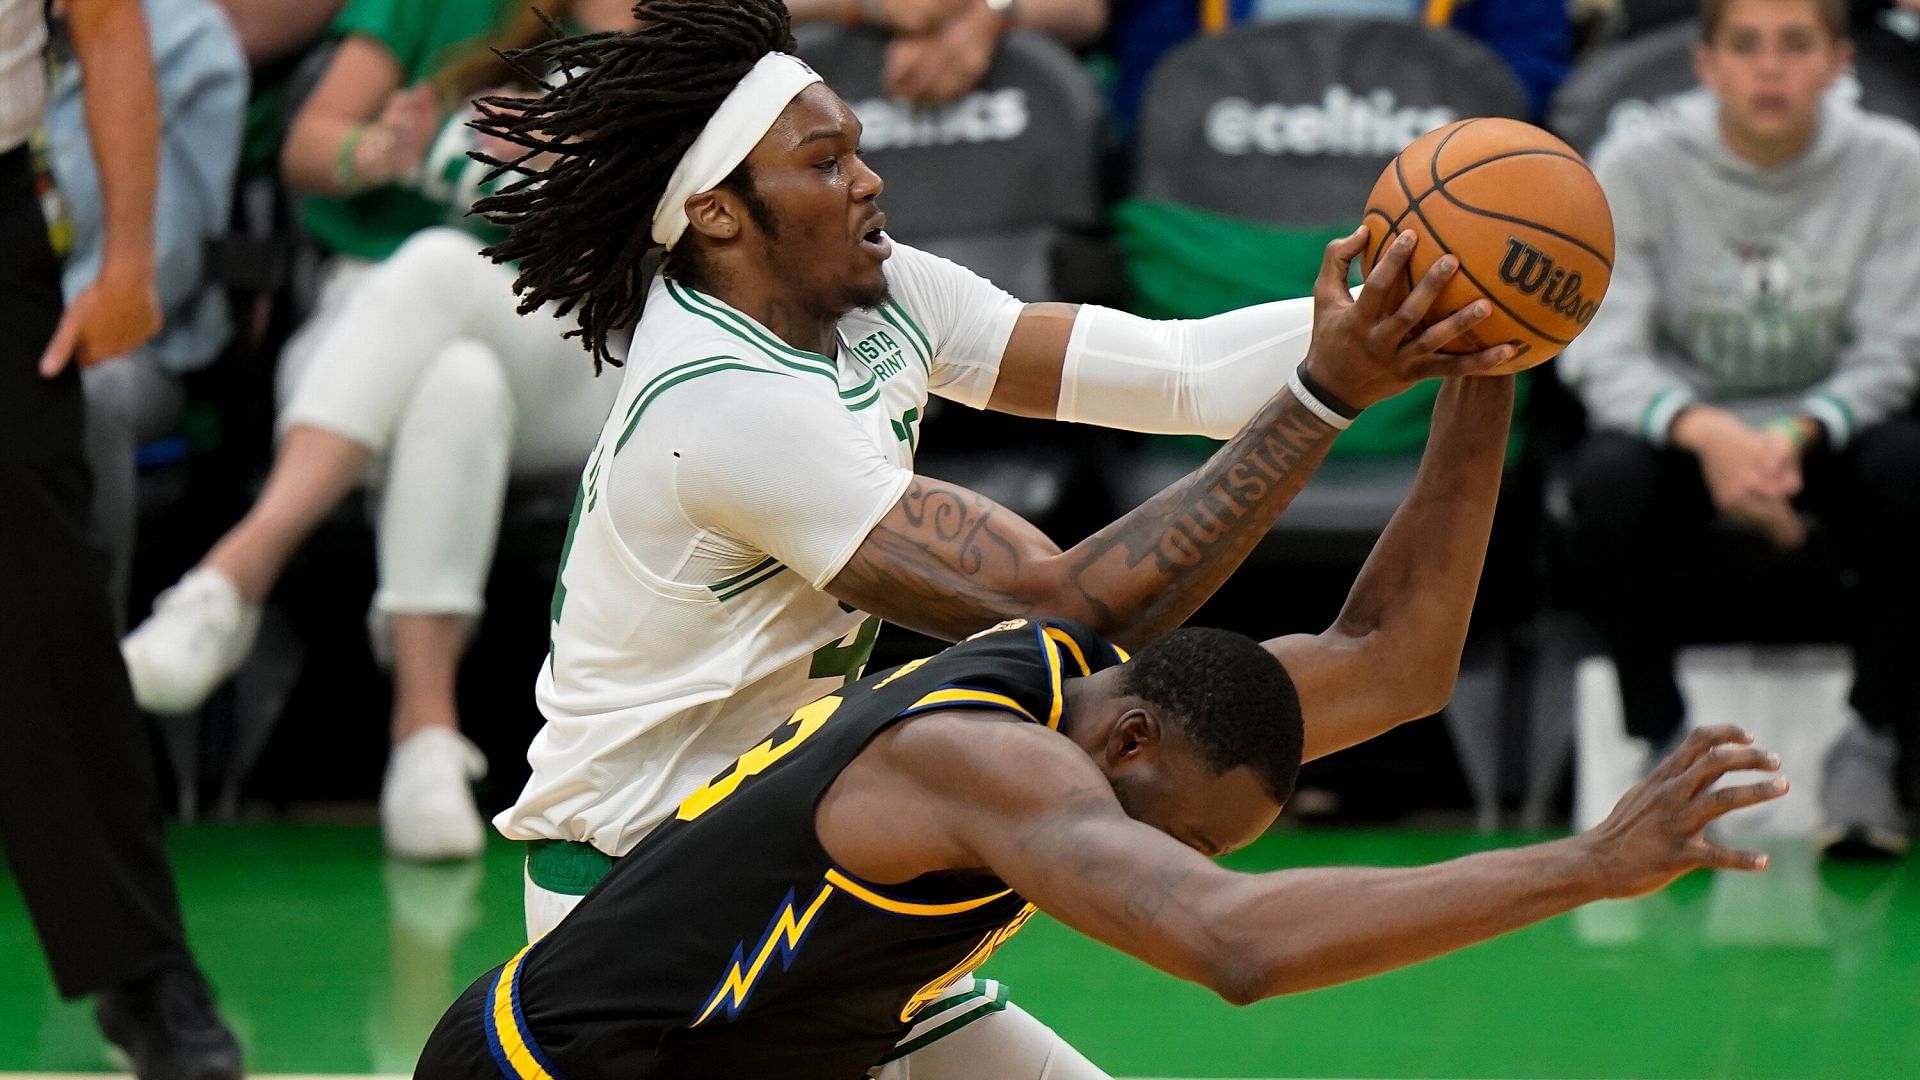 Draymond Green may have to spend more time battling Robert Williams in the paint. [Photo: New York Times]